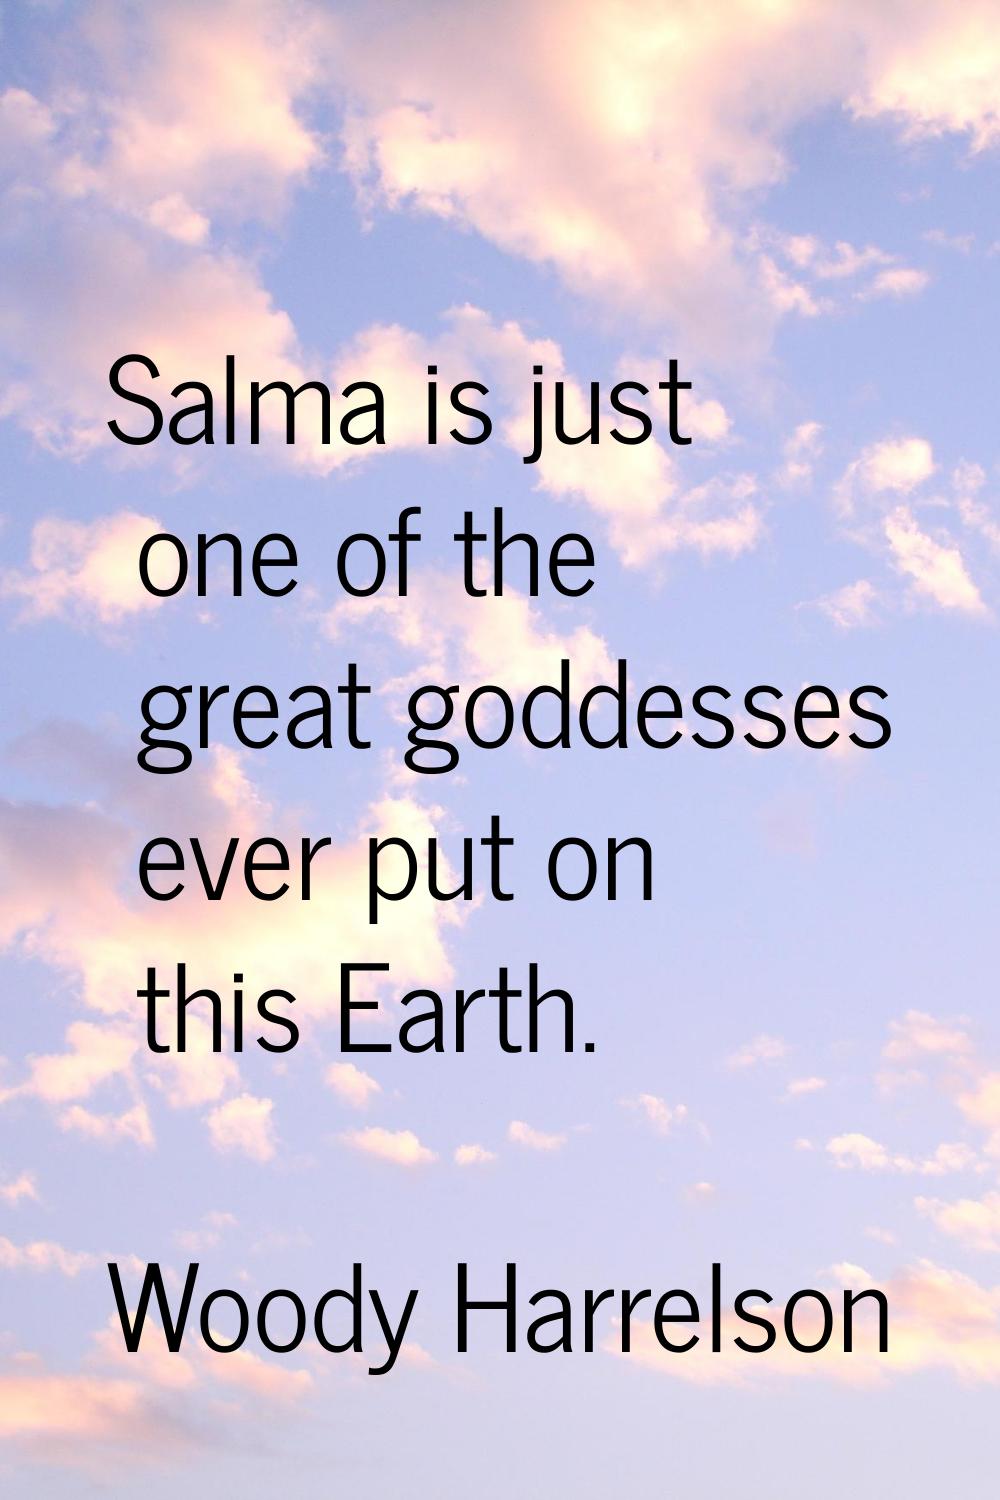 Salma is just one of the great goddesses ever put on this Earth.